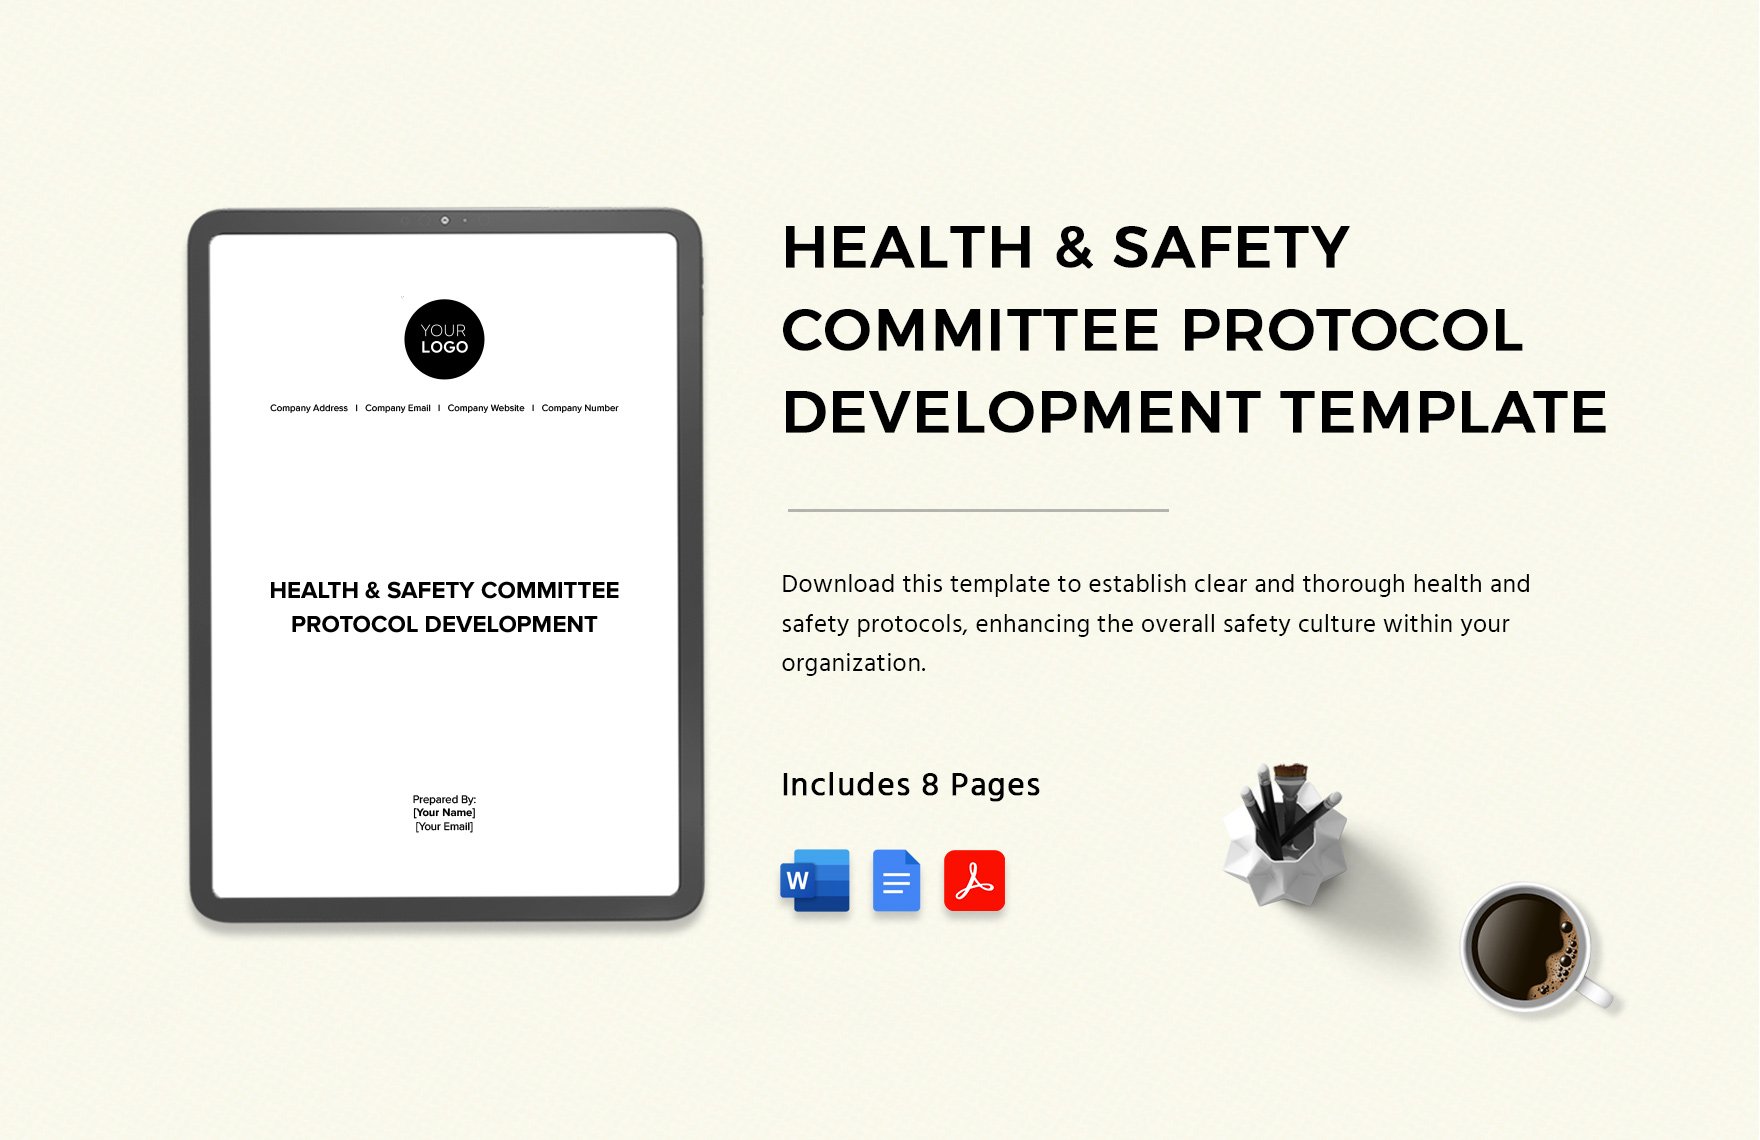 Health & Safety Committee Protocol Development Template